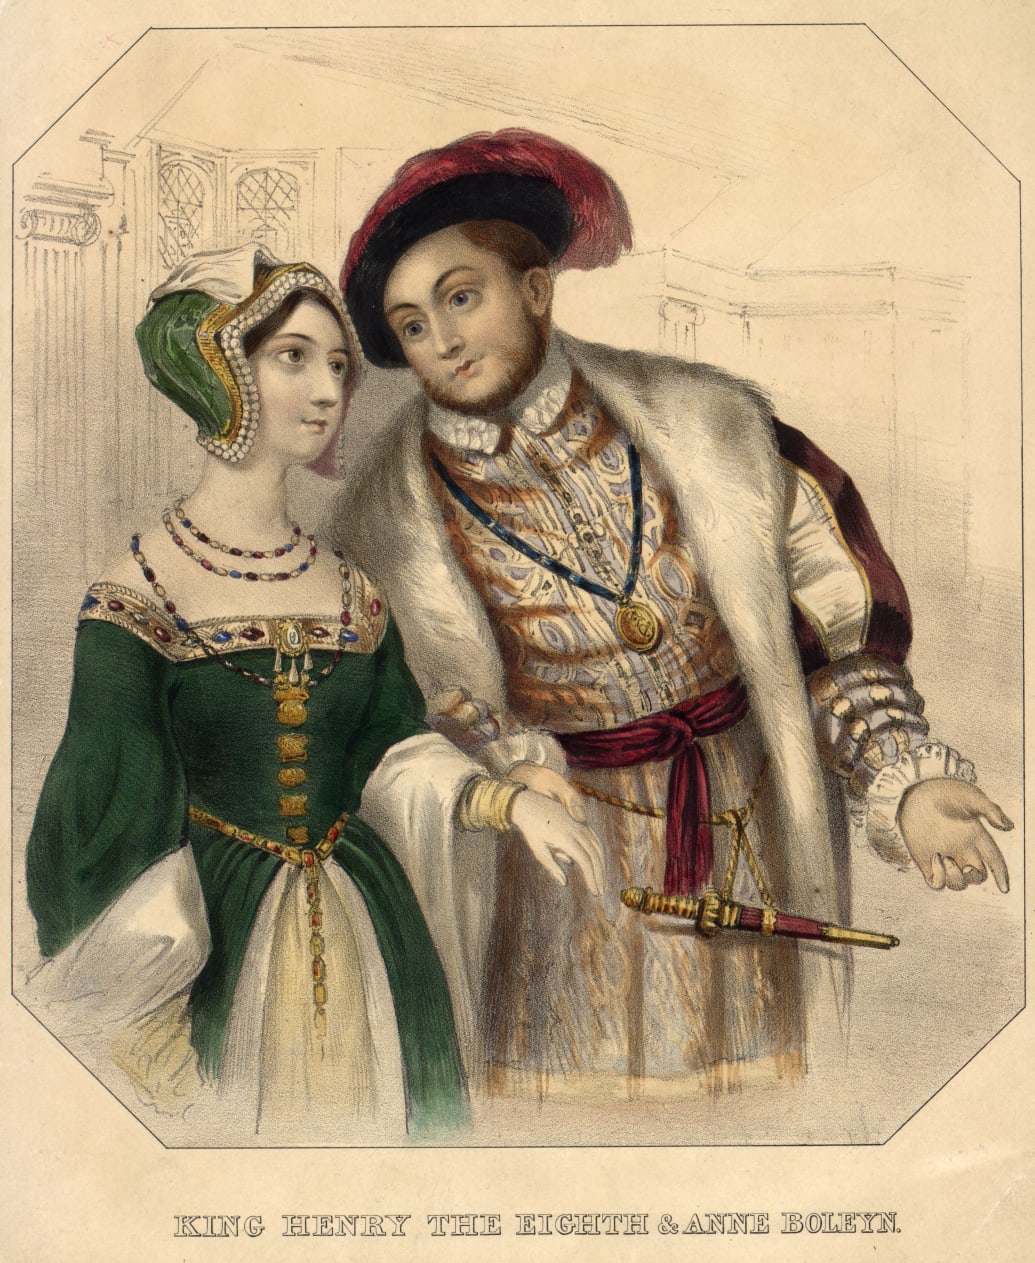 Circa 1535, King Henry VIII of England (1491-1547) and his second wife, Anne Boleyn (1507-1536).